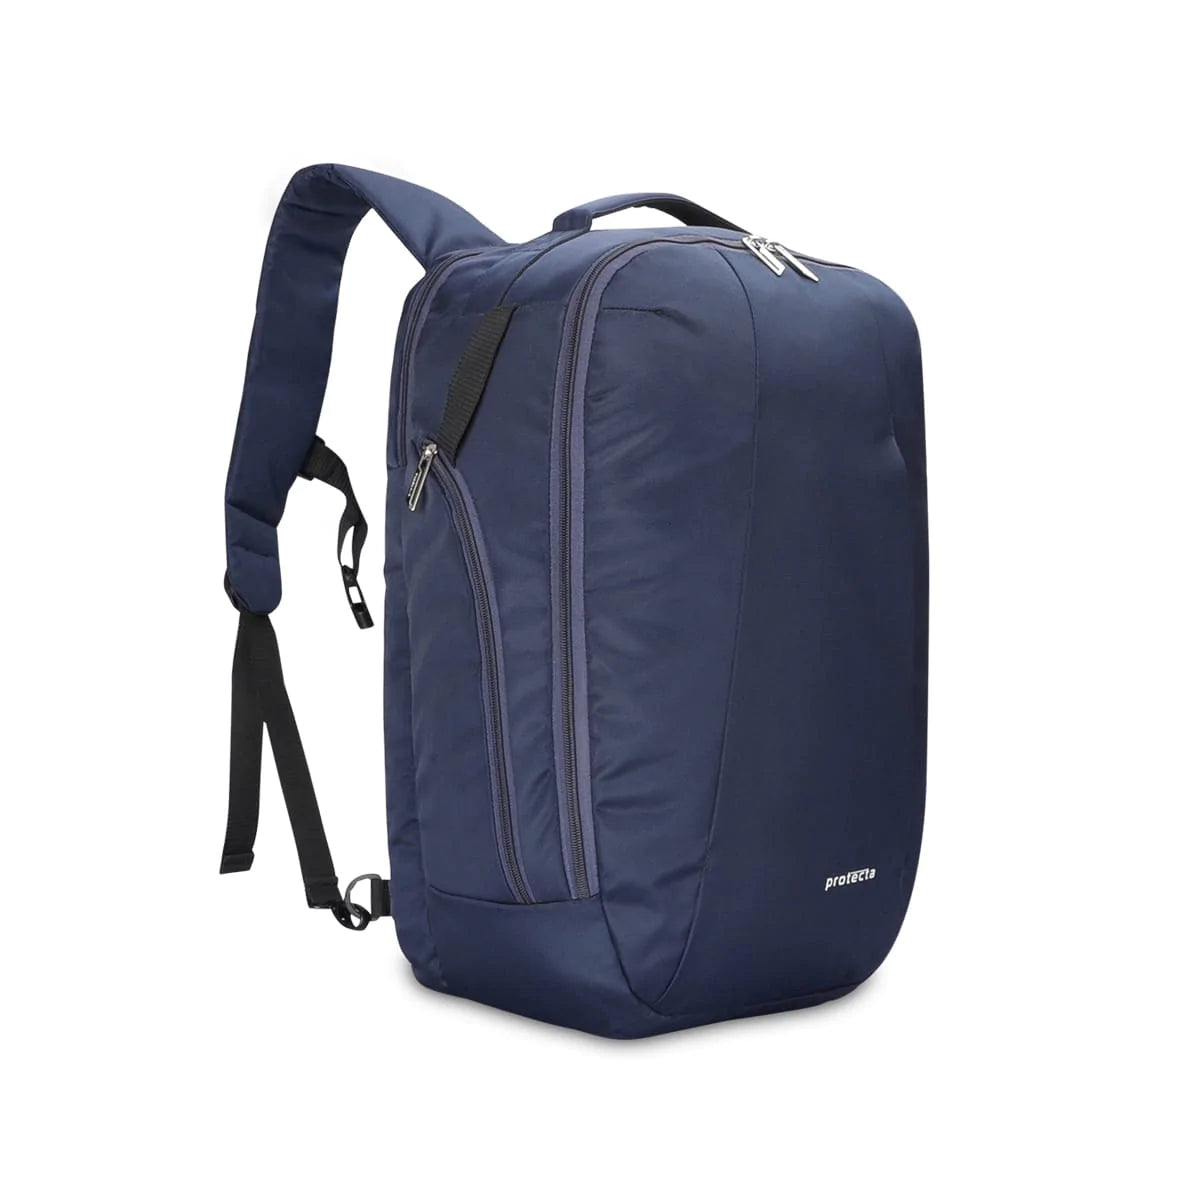 Navy | Protecta Proposed Merger Convertible Office Trave Laptop Backpack-Main